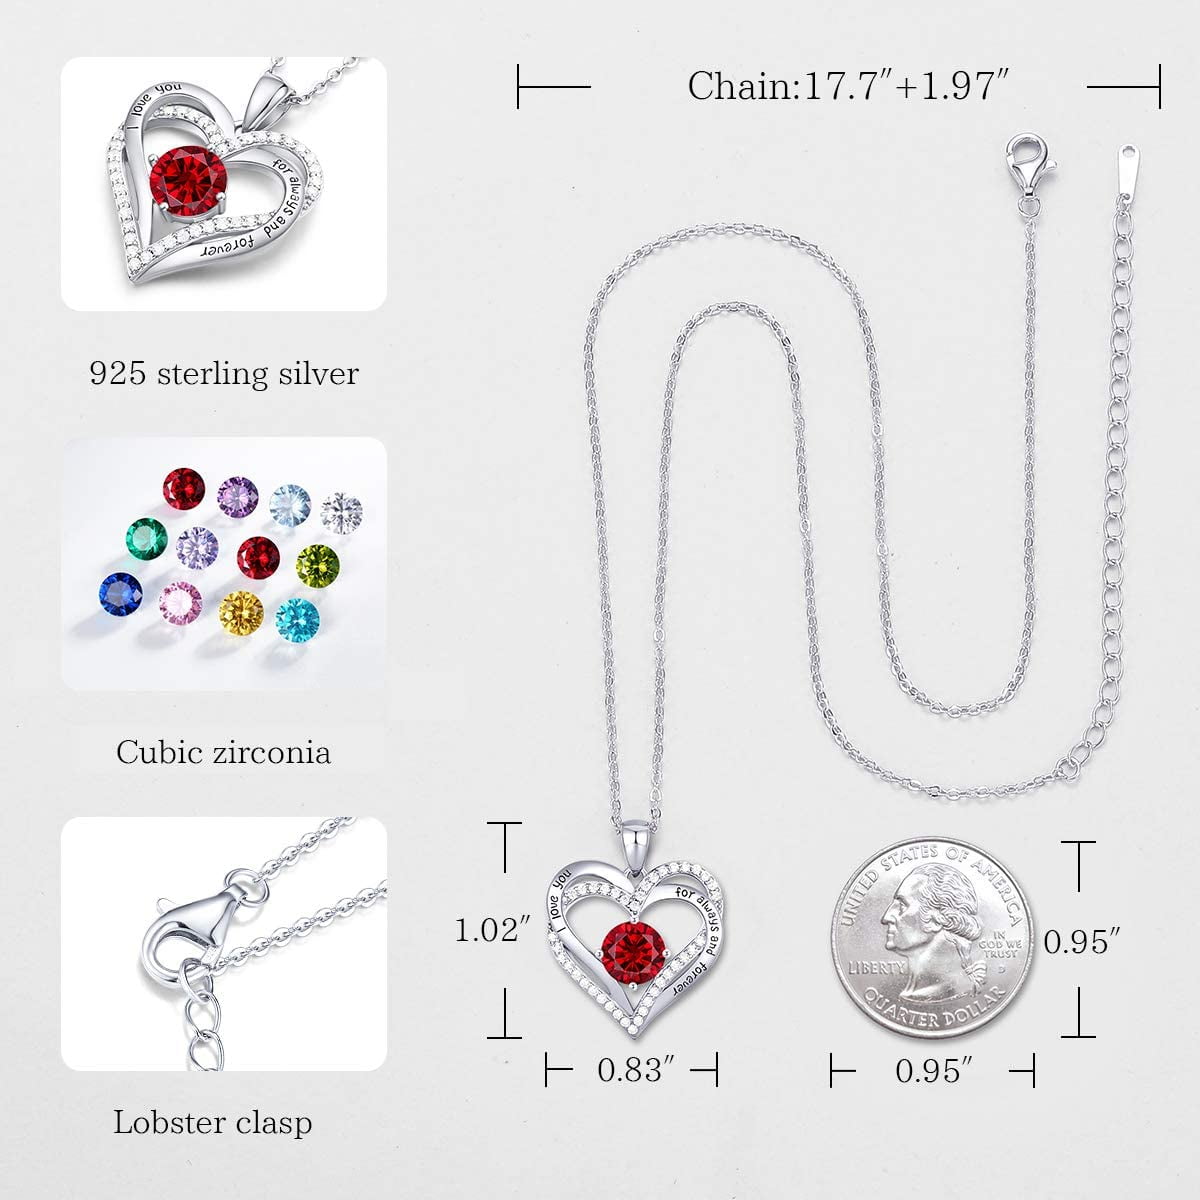 Details about   Rhodium Plated 925 Sterling Silver Construction Tractor Charm Pendant 